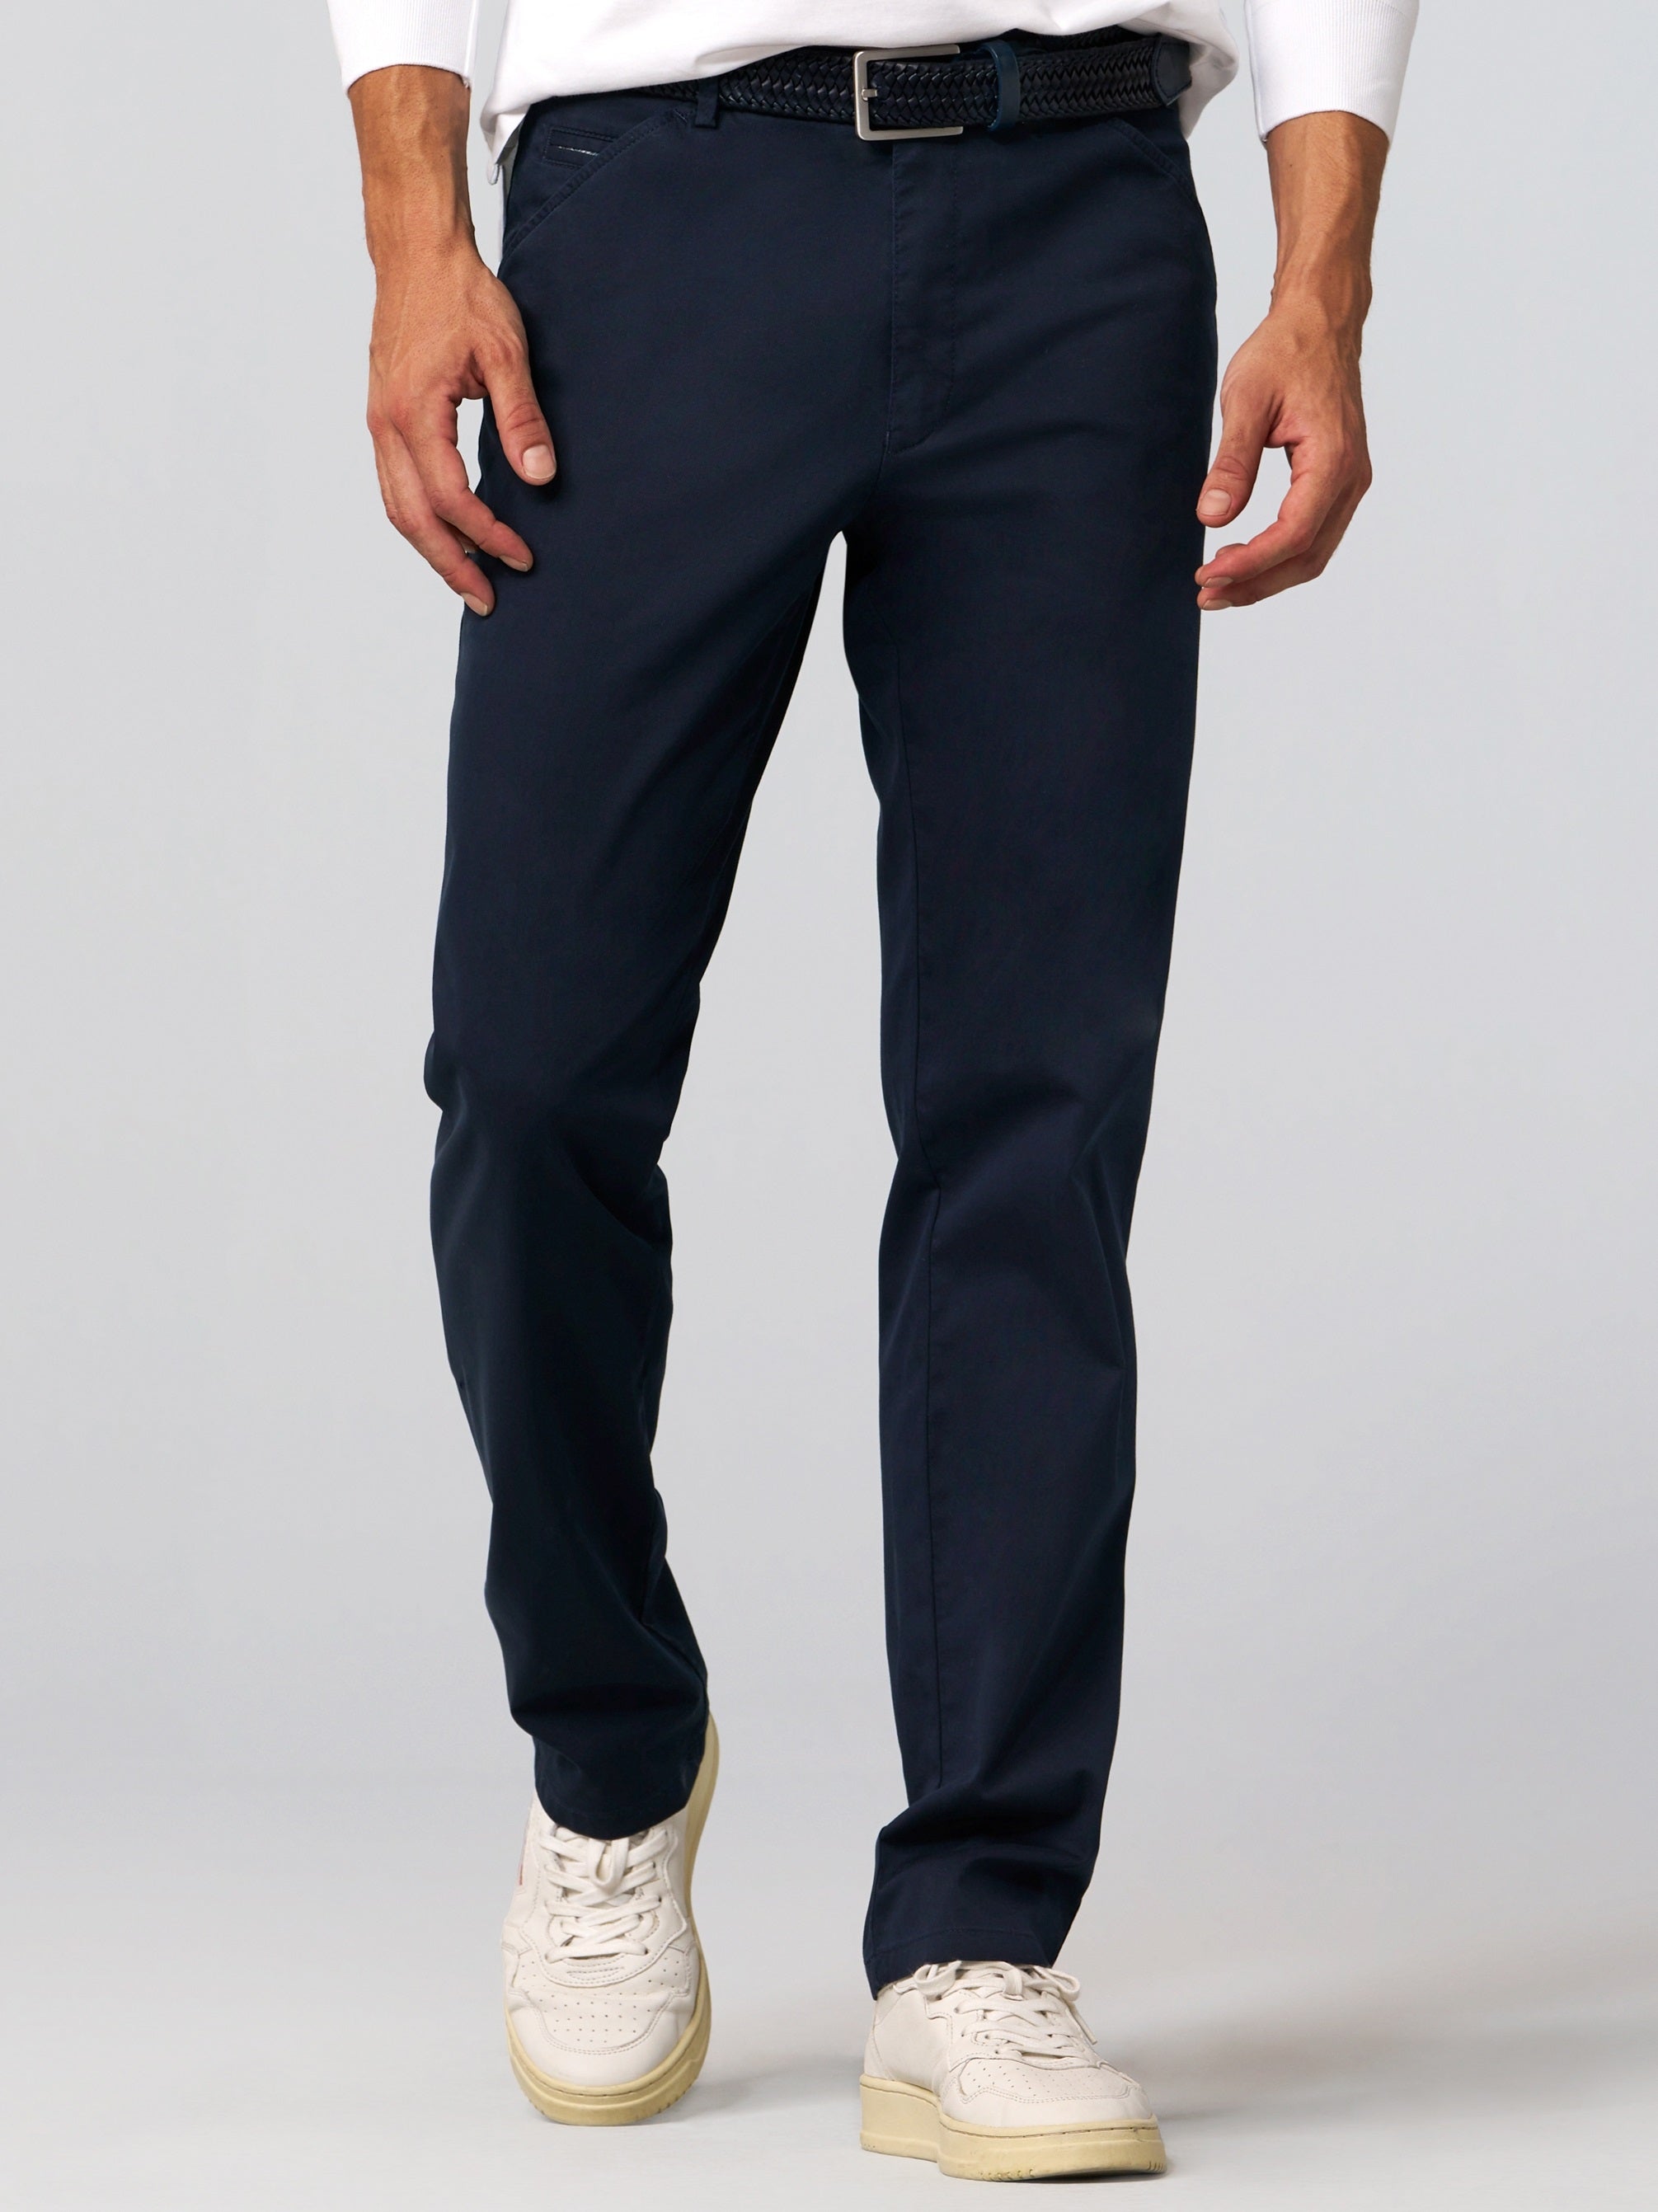 30% OFF - MEYER Chicago Trousers - 5060 Lightweight Cotton Chino - Navy